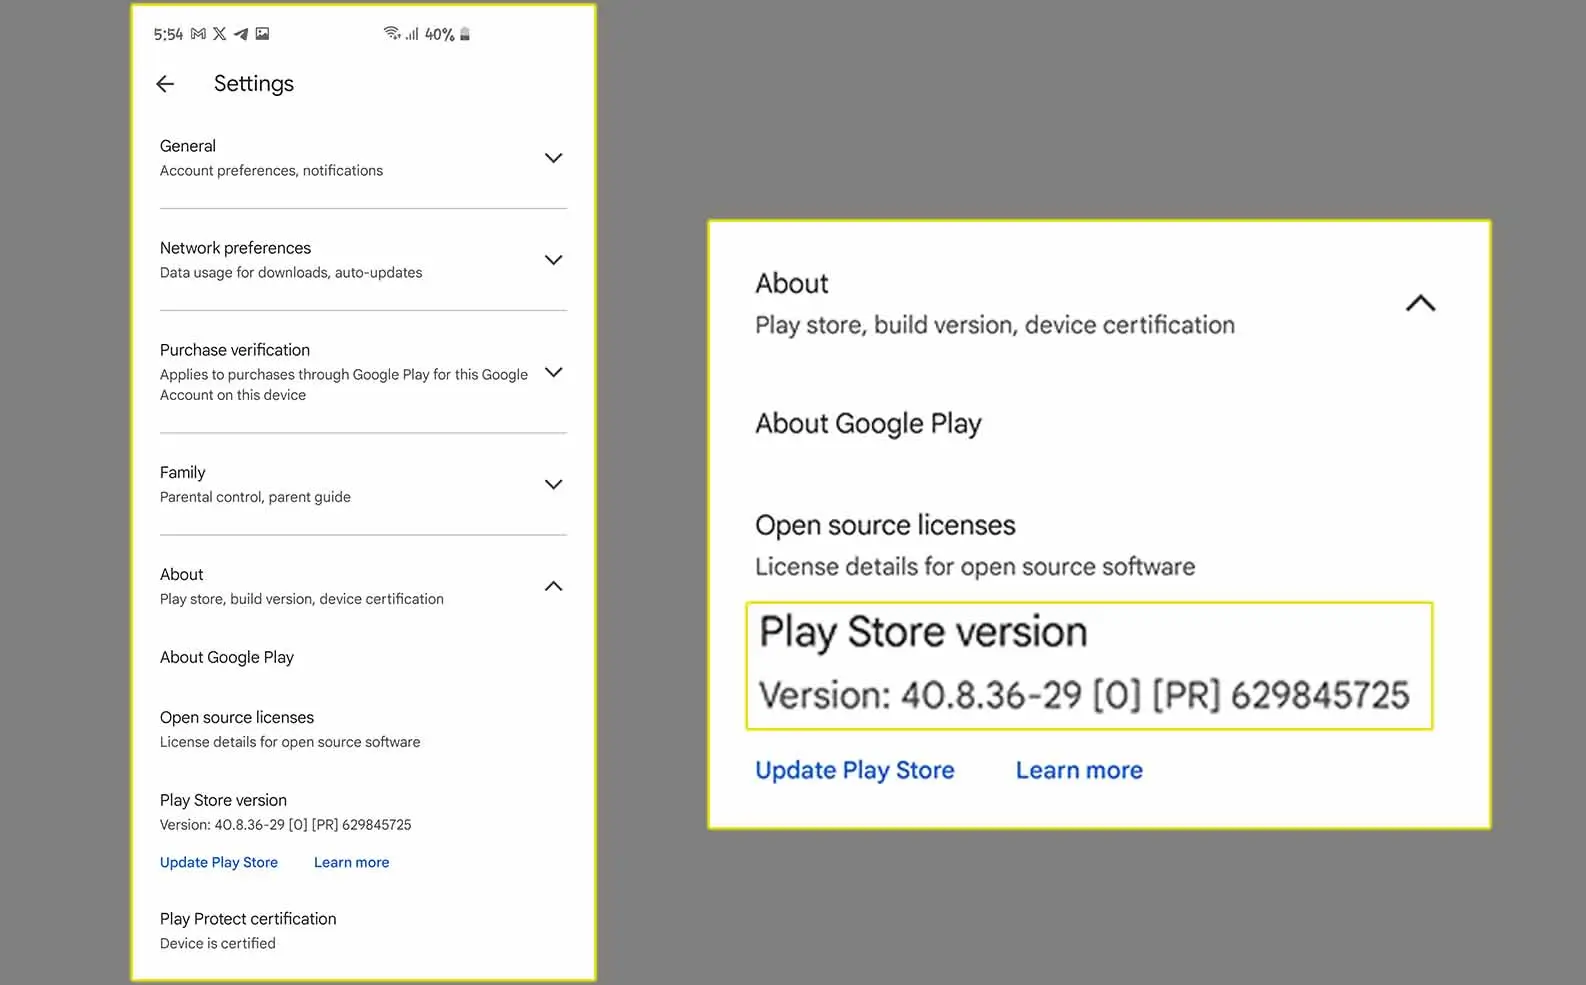 How to Update the Play Store